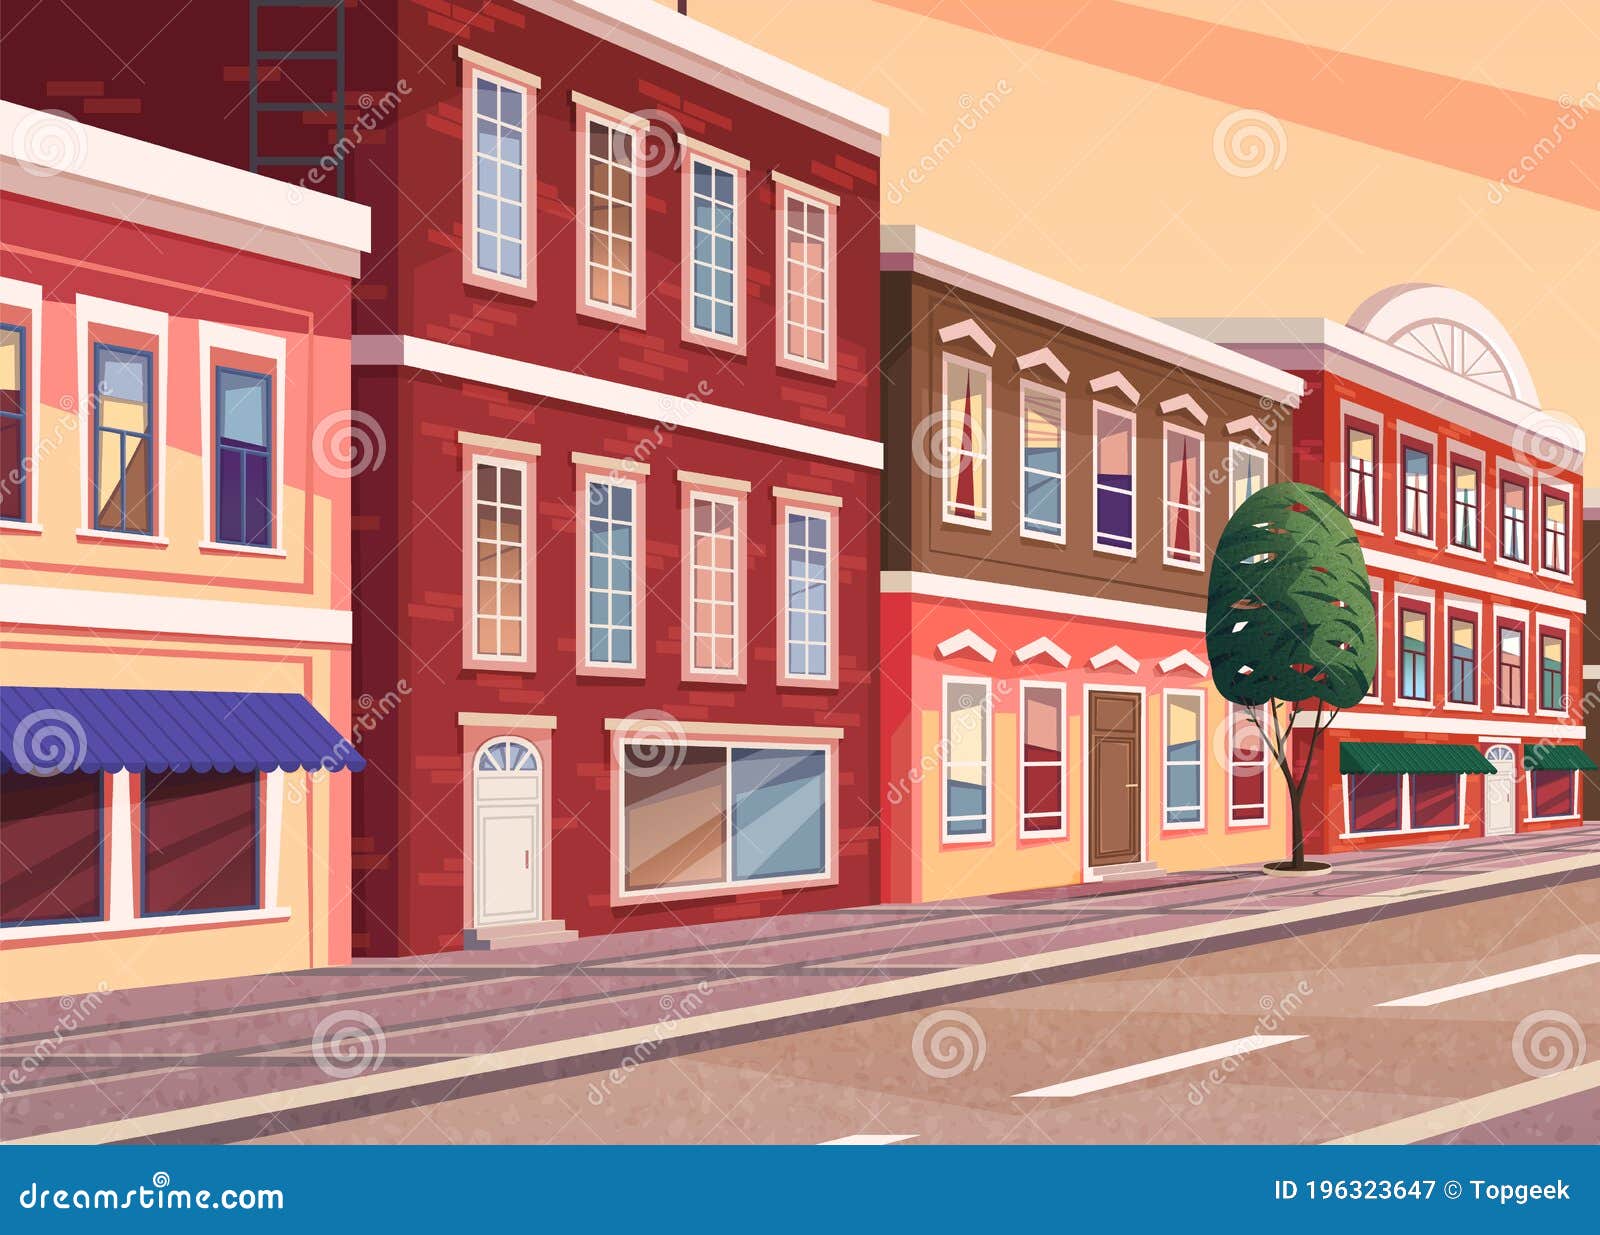 Street of Town Cartoon Illustration of the Historic City Area. Cityscape  with Vintage Brick Building Stock Vector - Illustration of america, area:  196323647